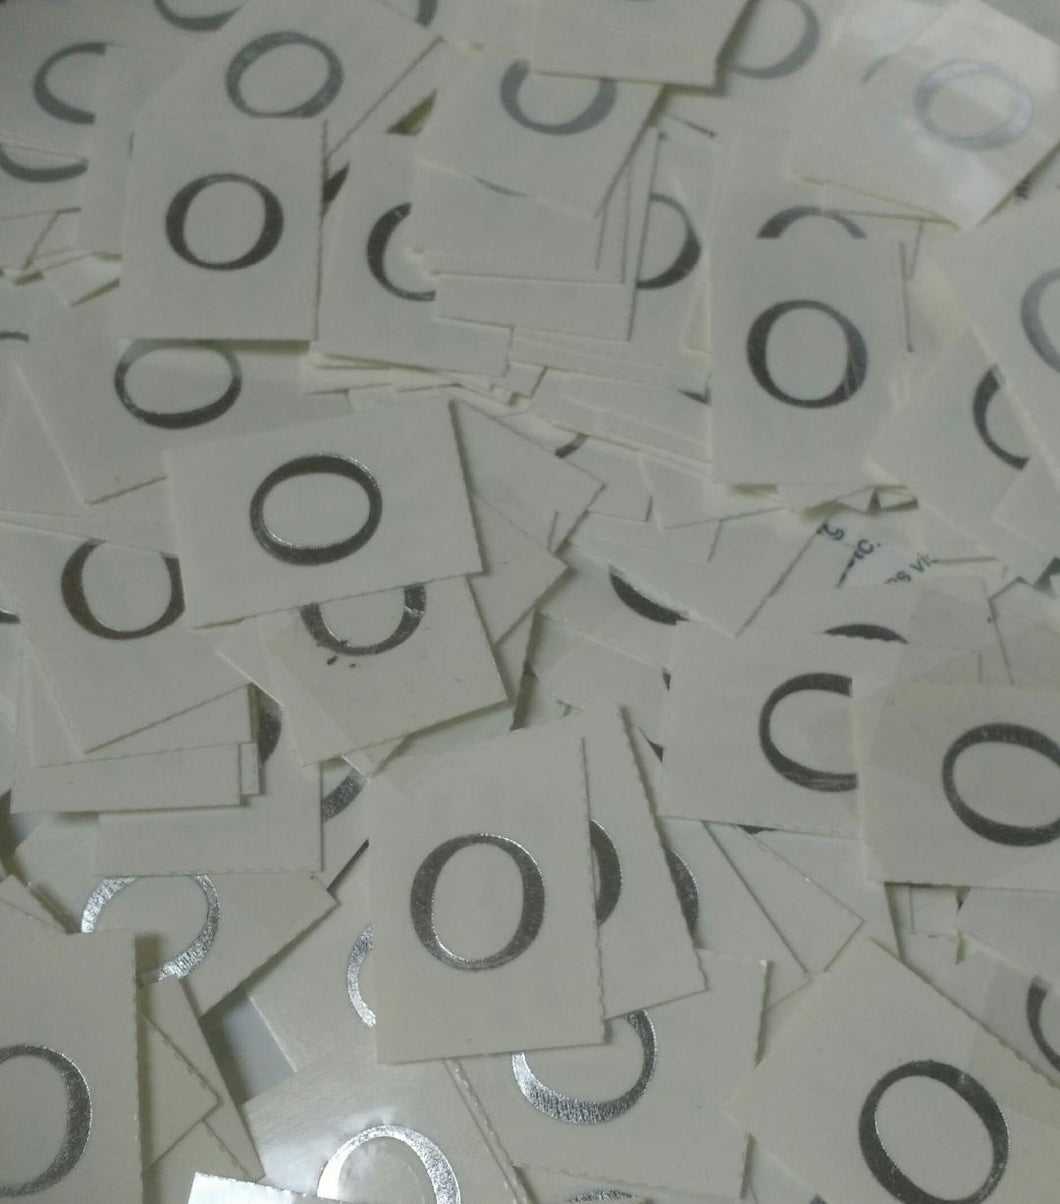 Individual Letter Tattoos - Omicron